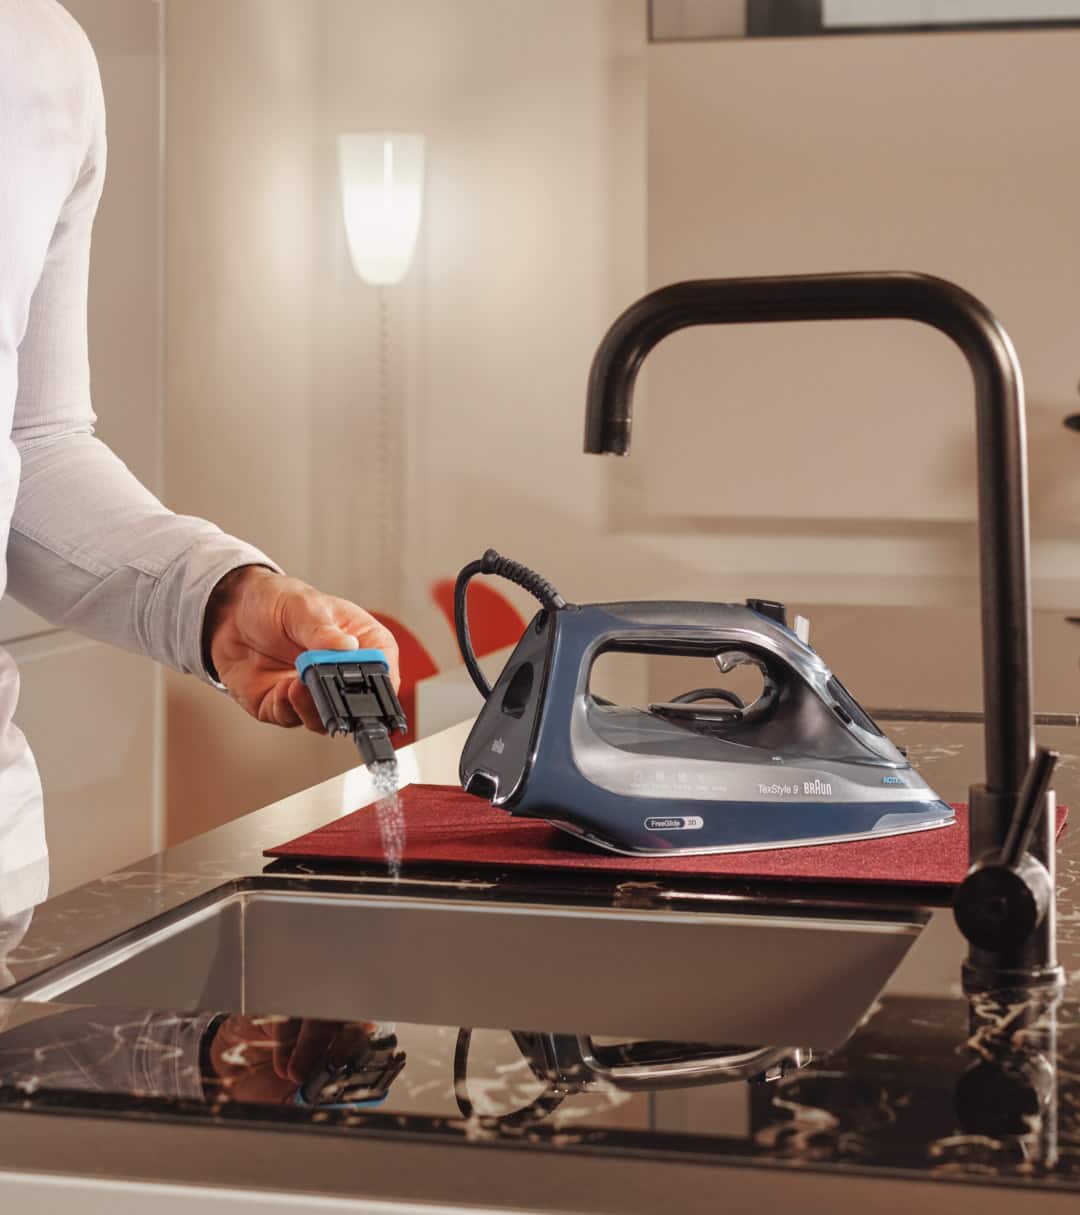 Braun TexStyle 9 Steam iron with ActiCIean System - easy to clean.